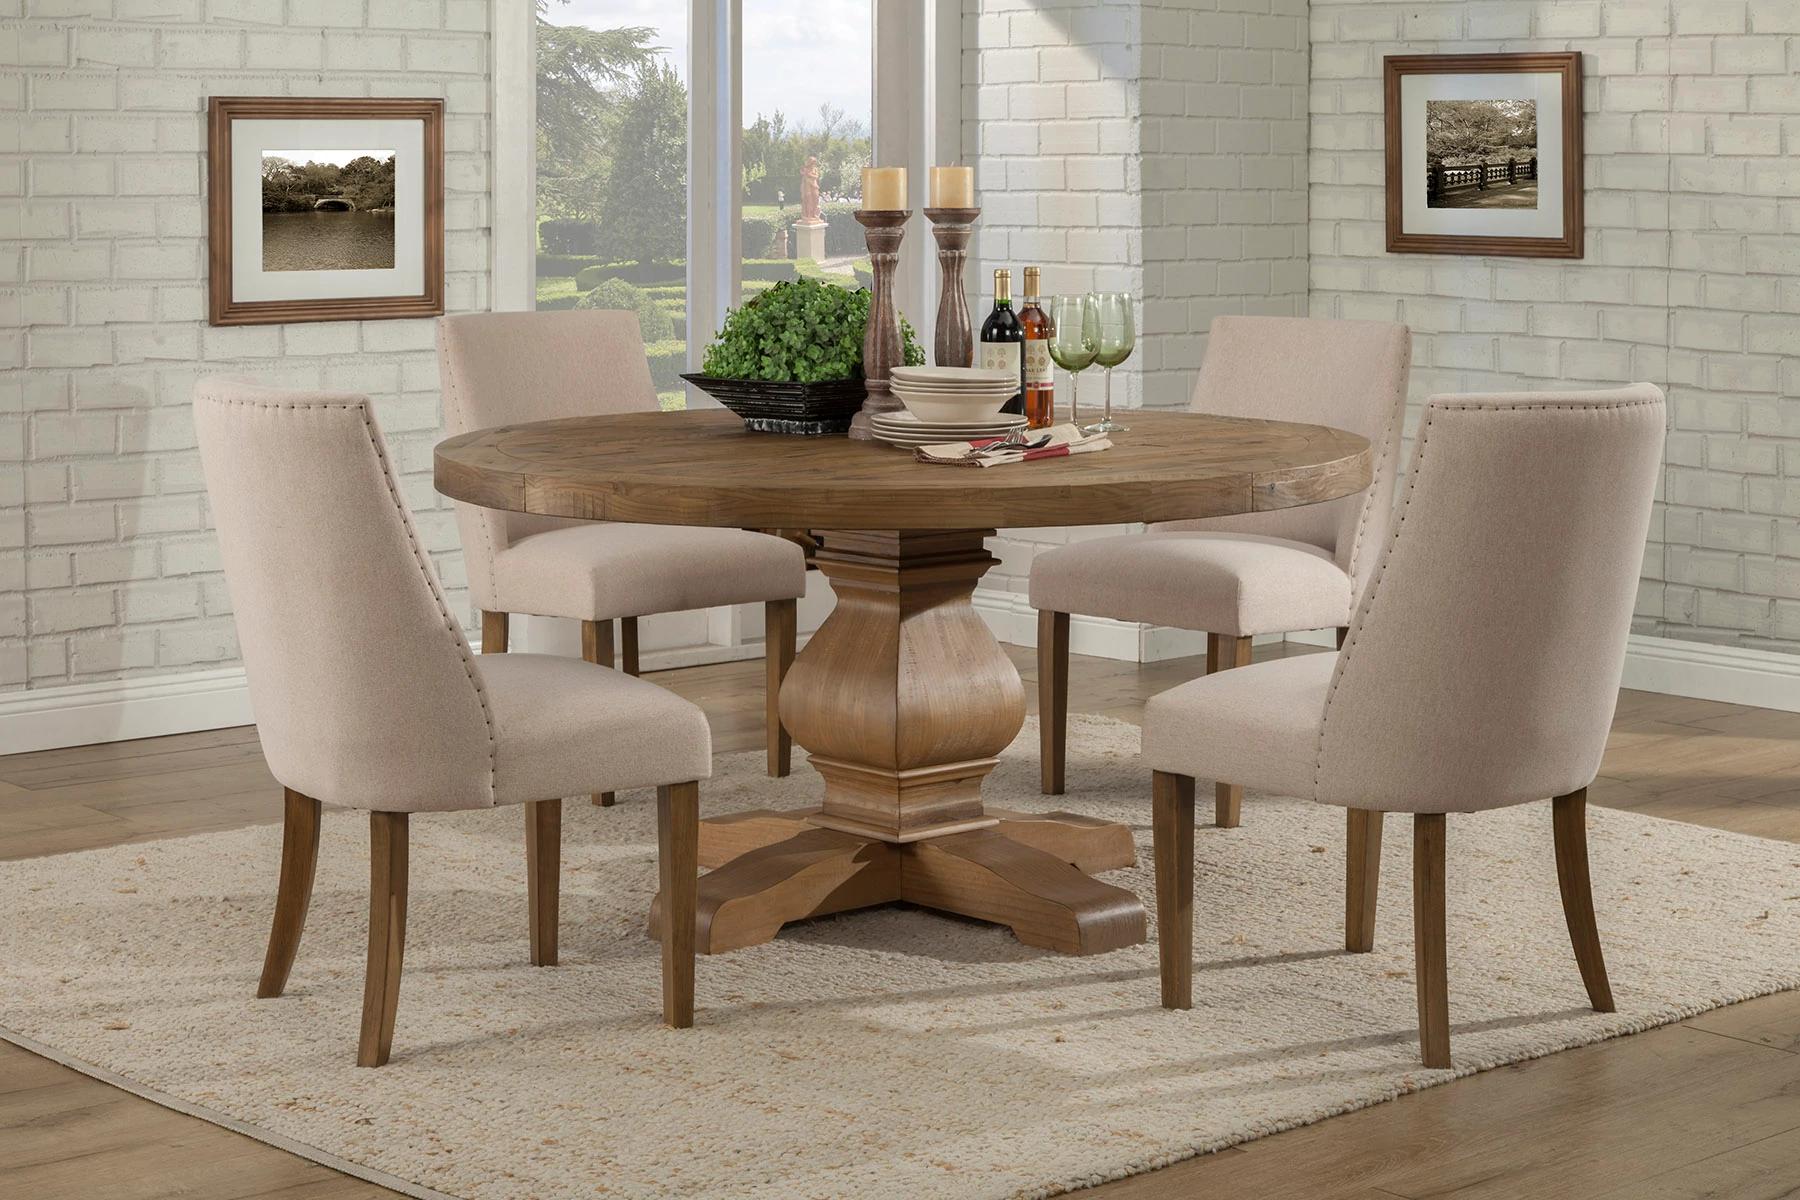 Contemporary, Rustic Dining Table Set KENSINGTON 2668-25-Set-5 in Natural Fabric